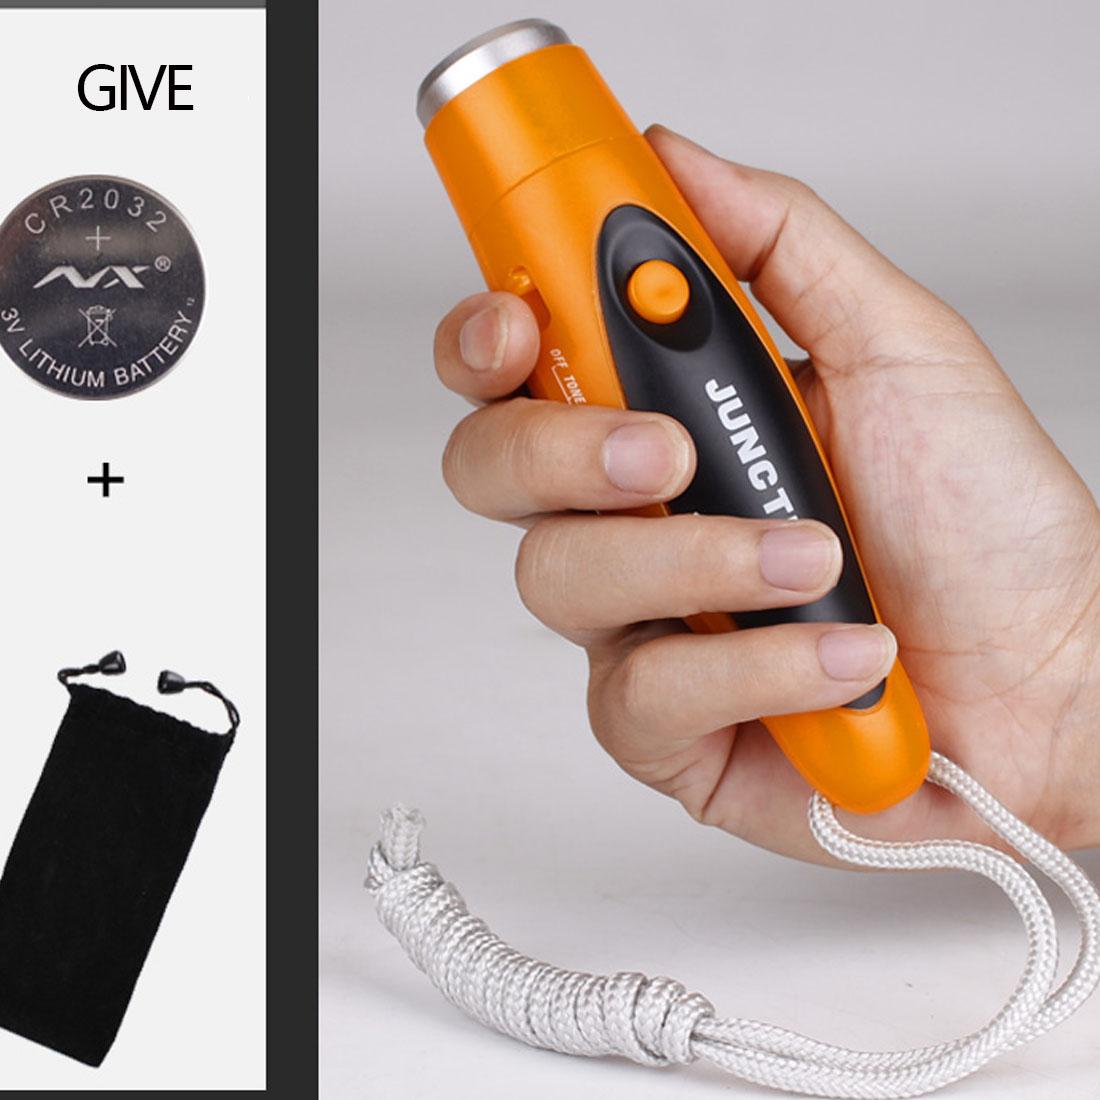 LikeYellow Electronic Whistle Professional Multipurpose Sports Hygienic Handheld Whistle with Lanyard Hand Whistles for Referee Coaches P.E Teacher Training Outdoor Camping 